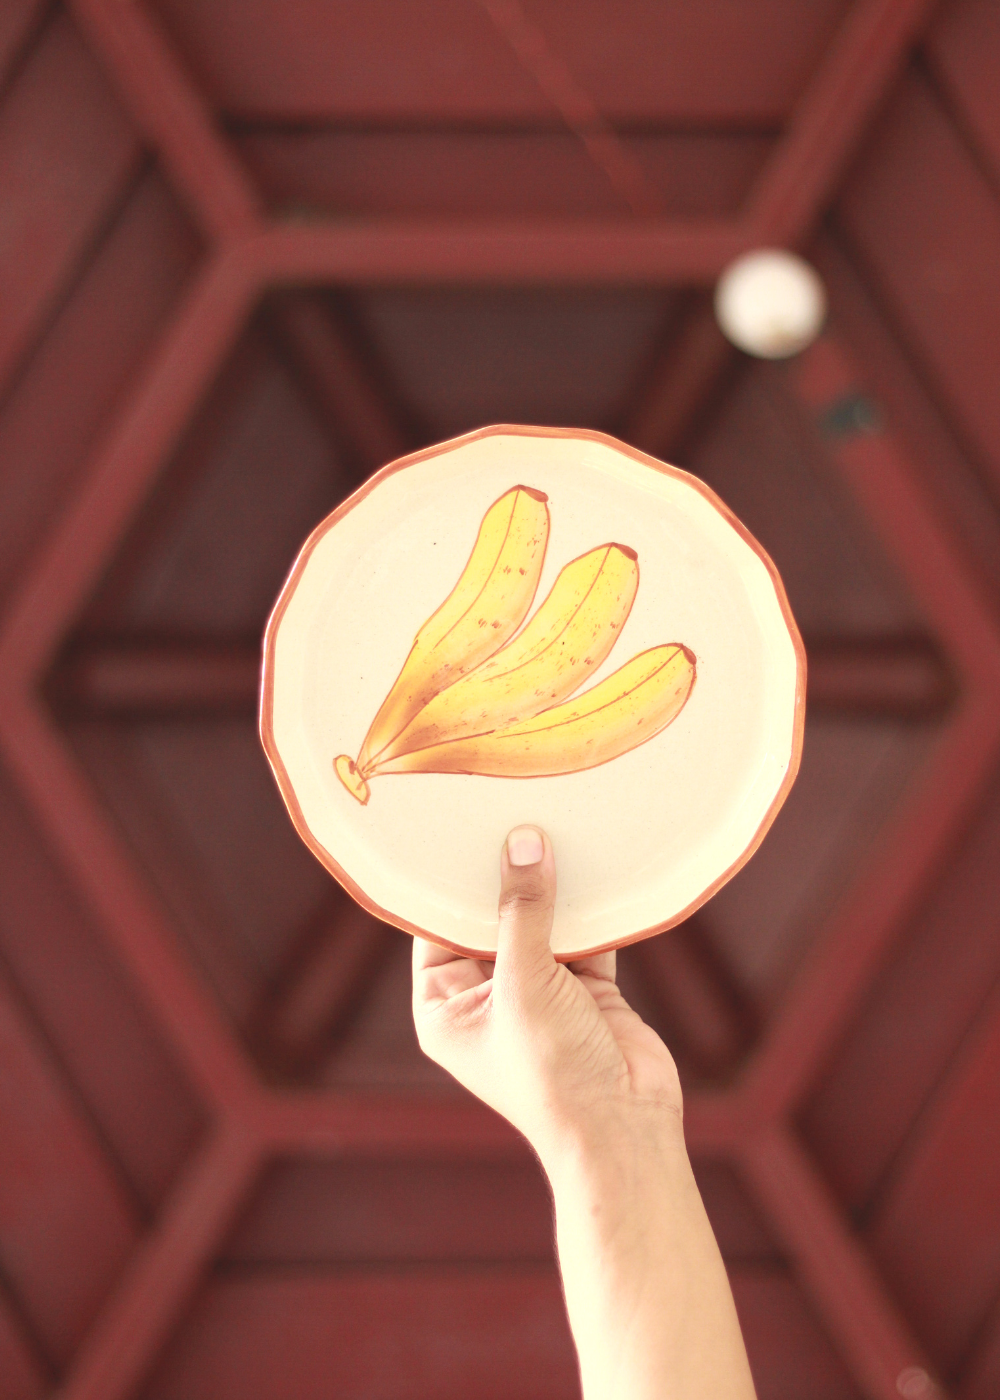 Someone holding a plate designed banana on it